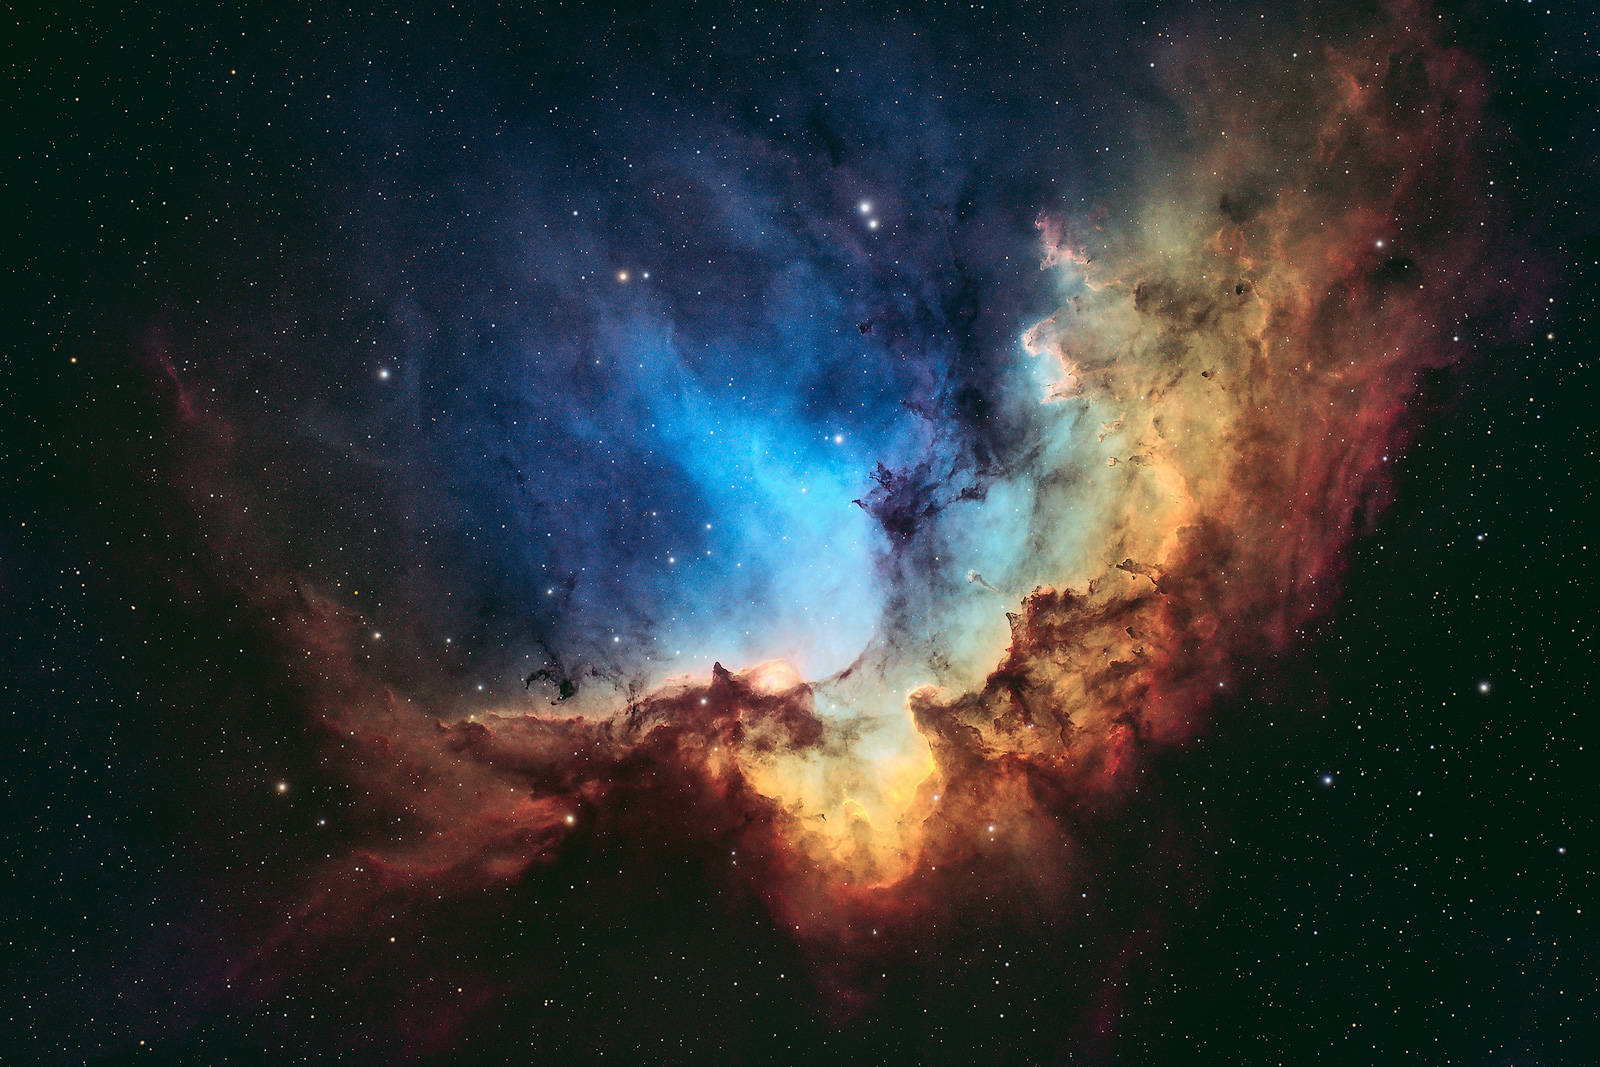 The Wizard Nebula (NGC 7380) is comprised of an emission nebula and star cluster located in the constellation of Cepheus.